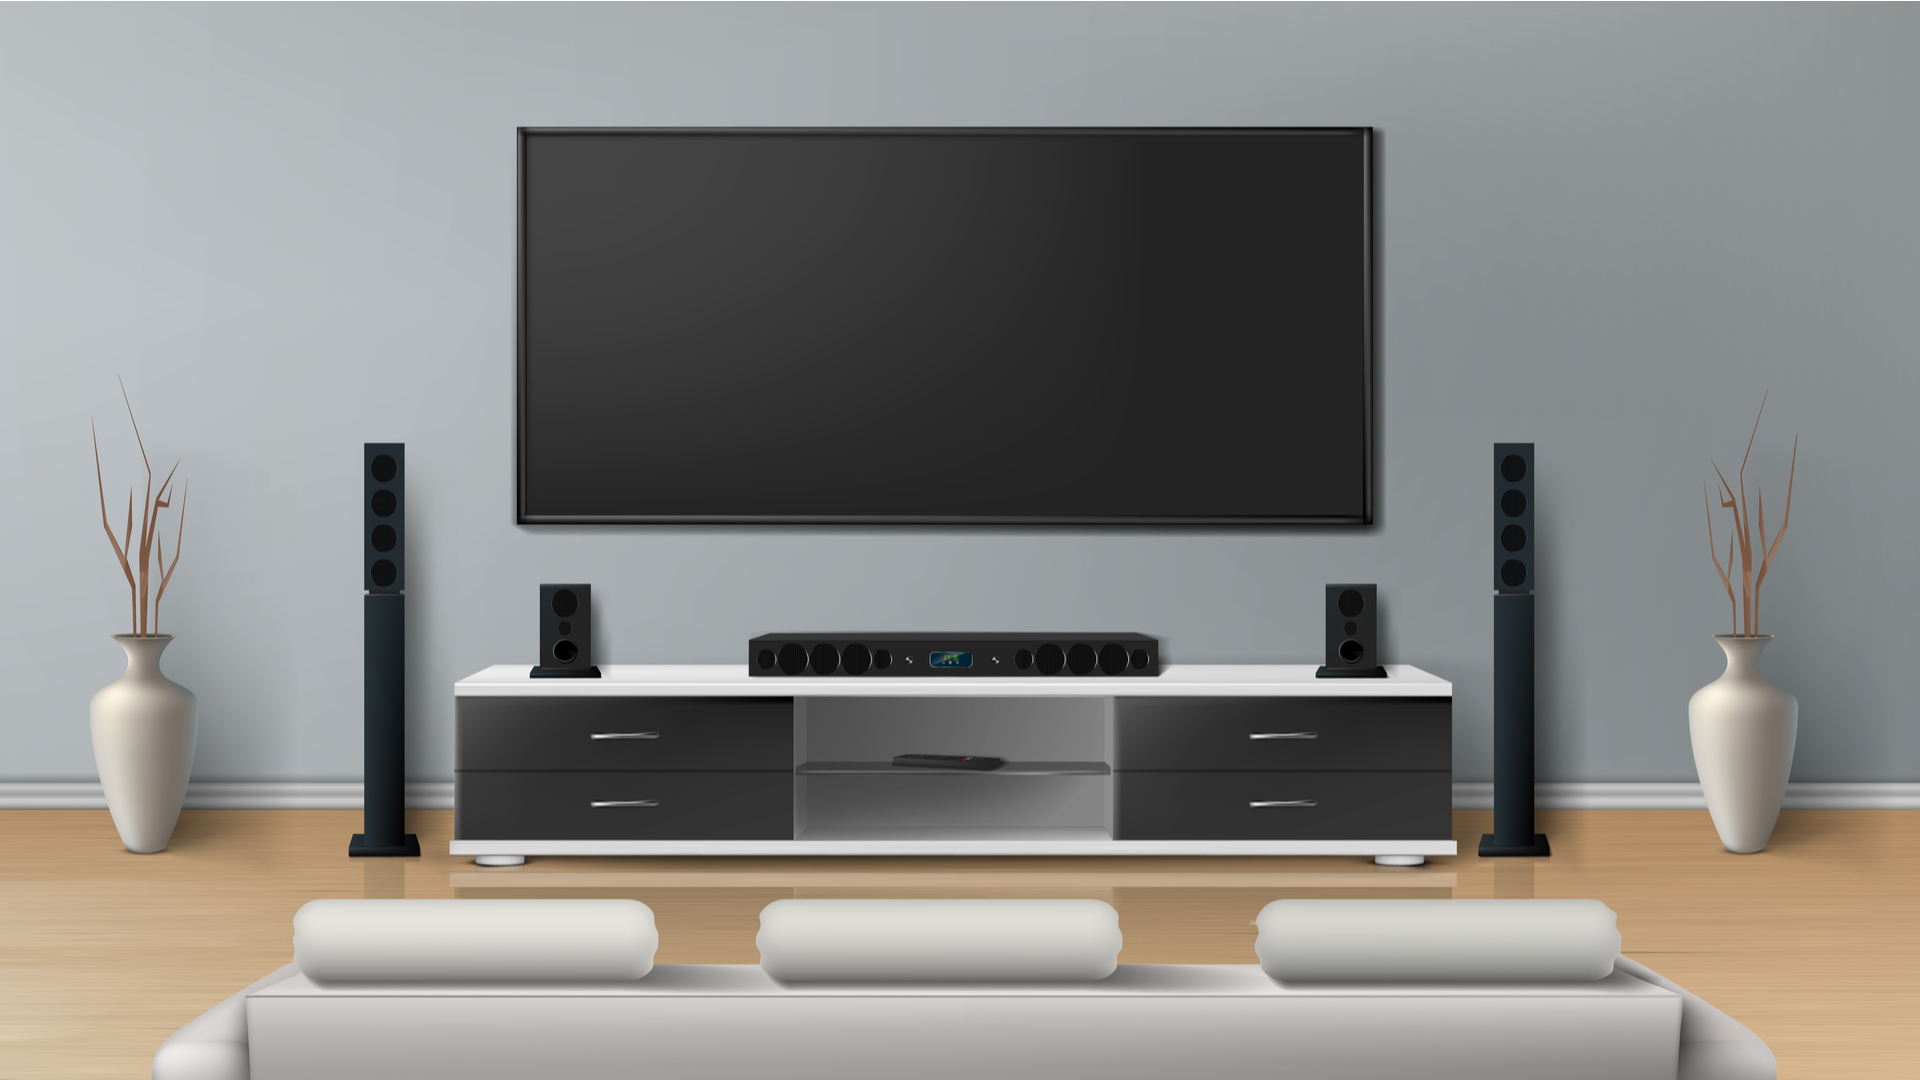 Soundbar Vs Surround Sound: Which Is Better For You?